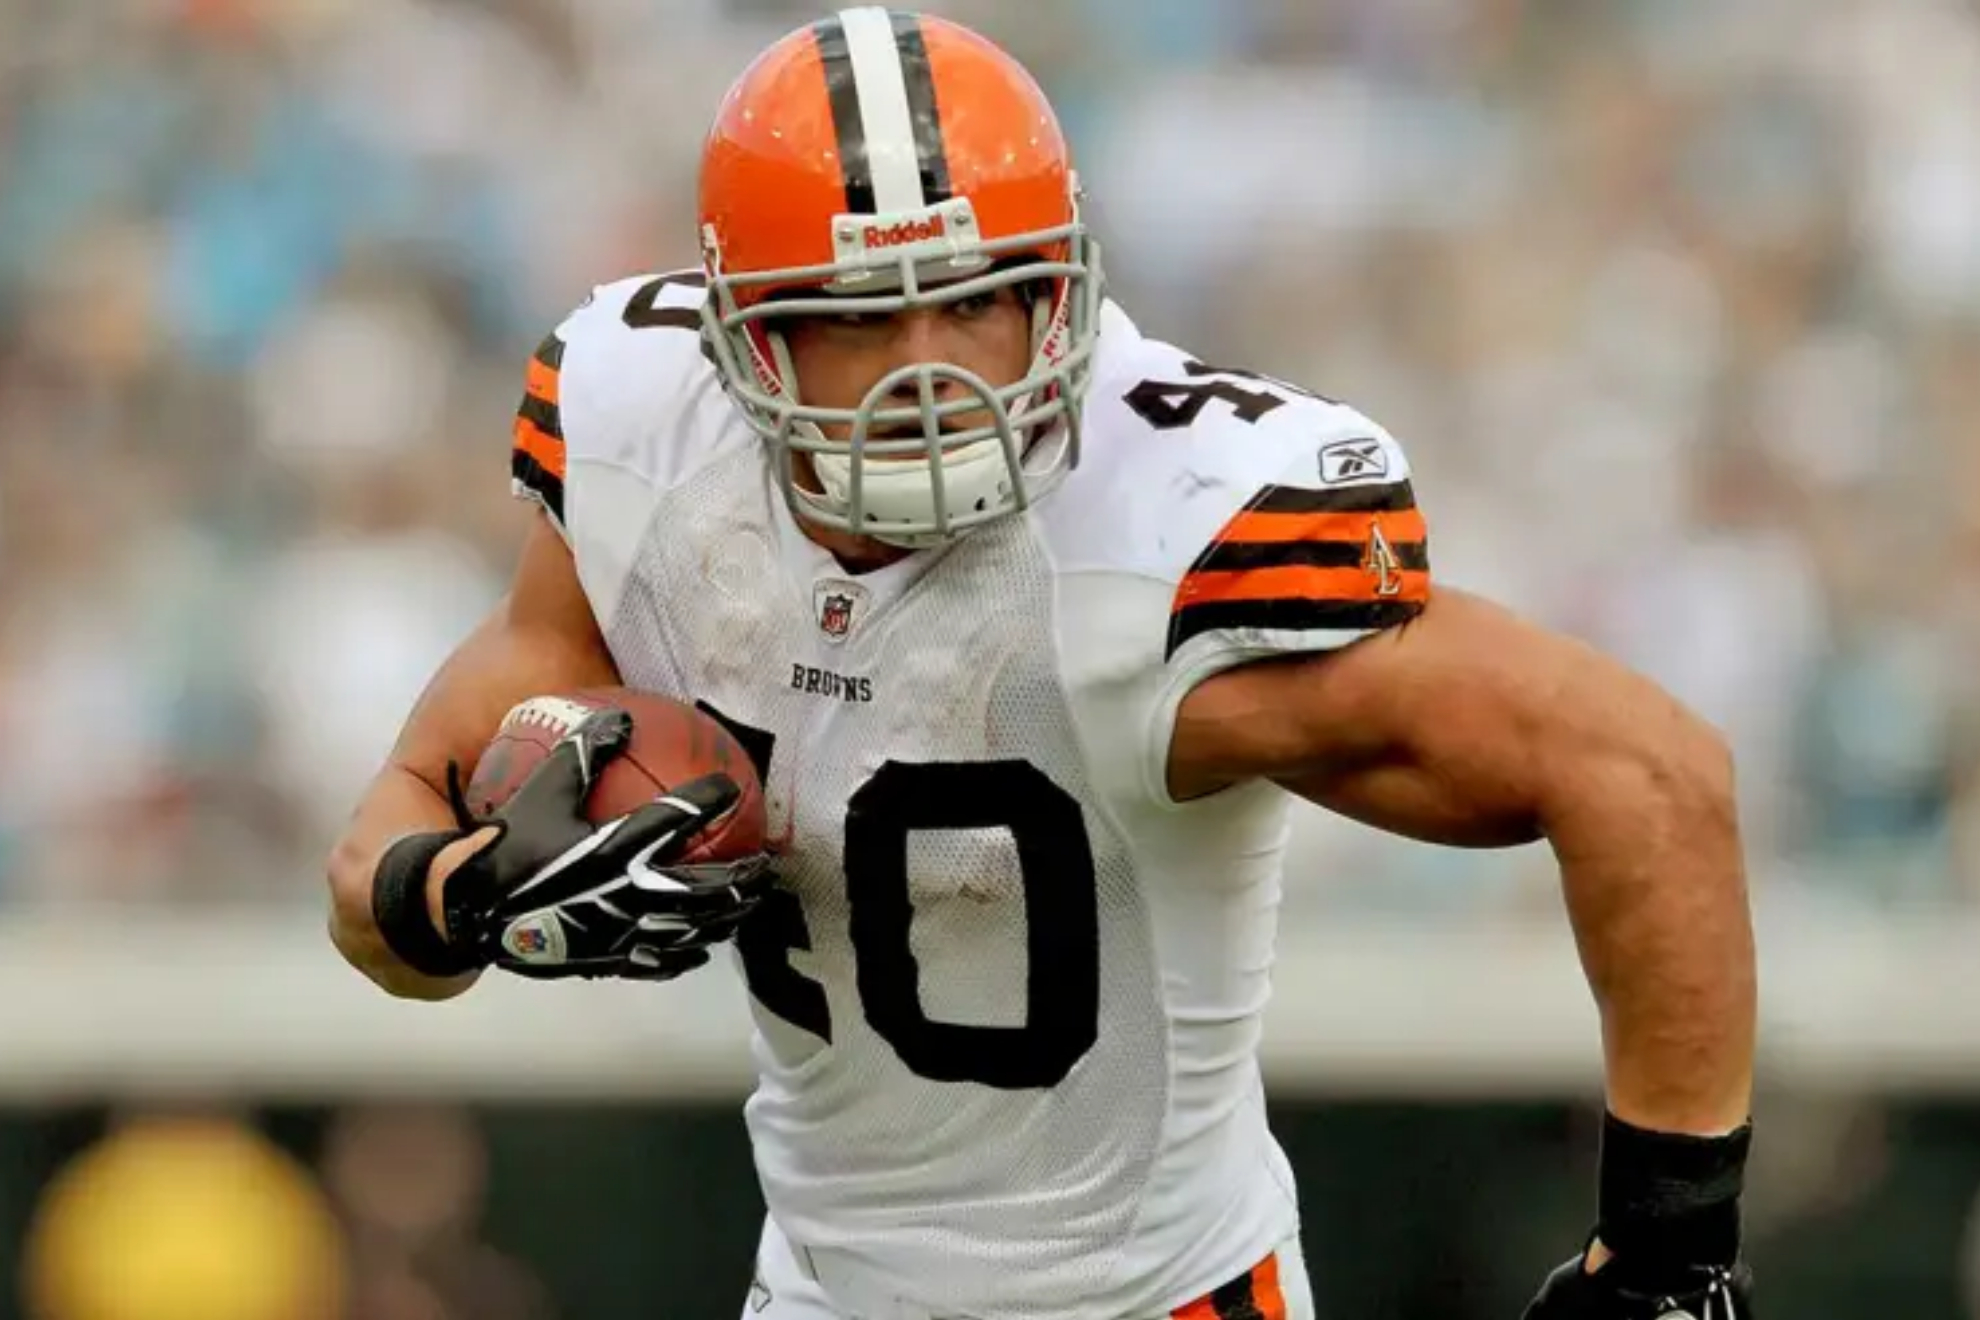 Peyton Hillis during his playing days for the Cleveland Browns.